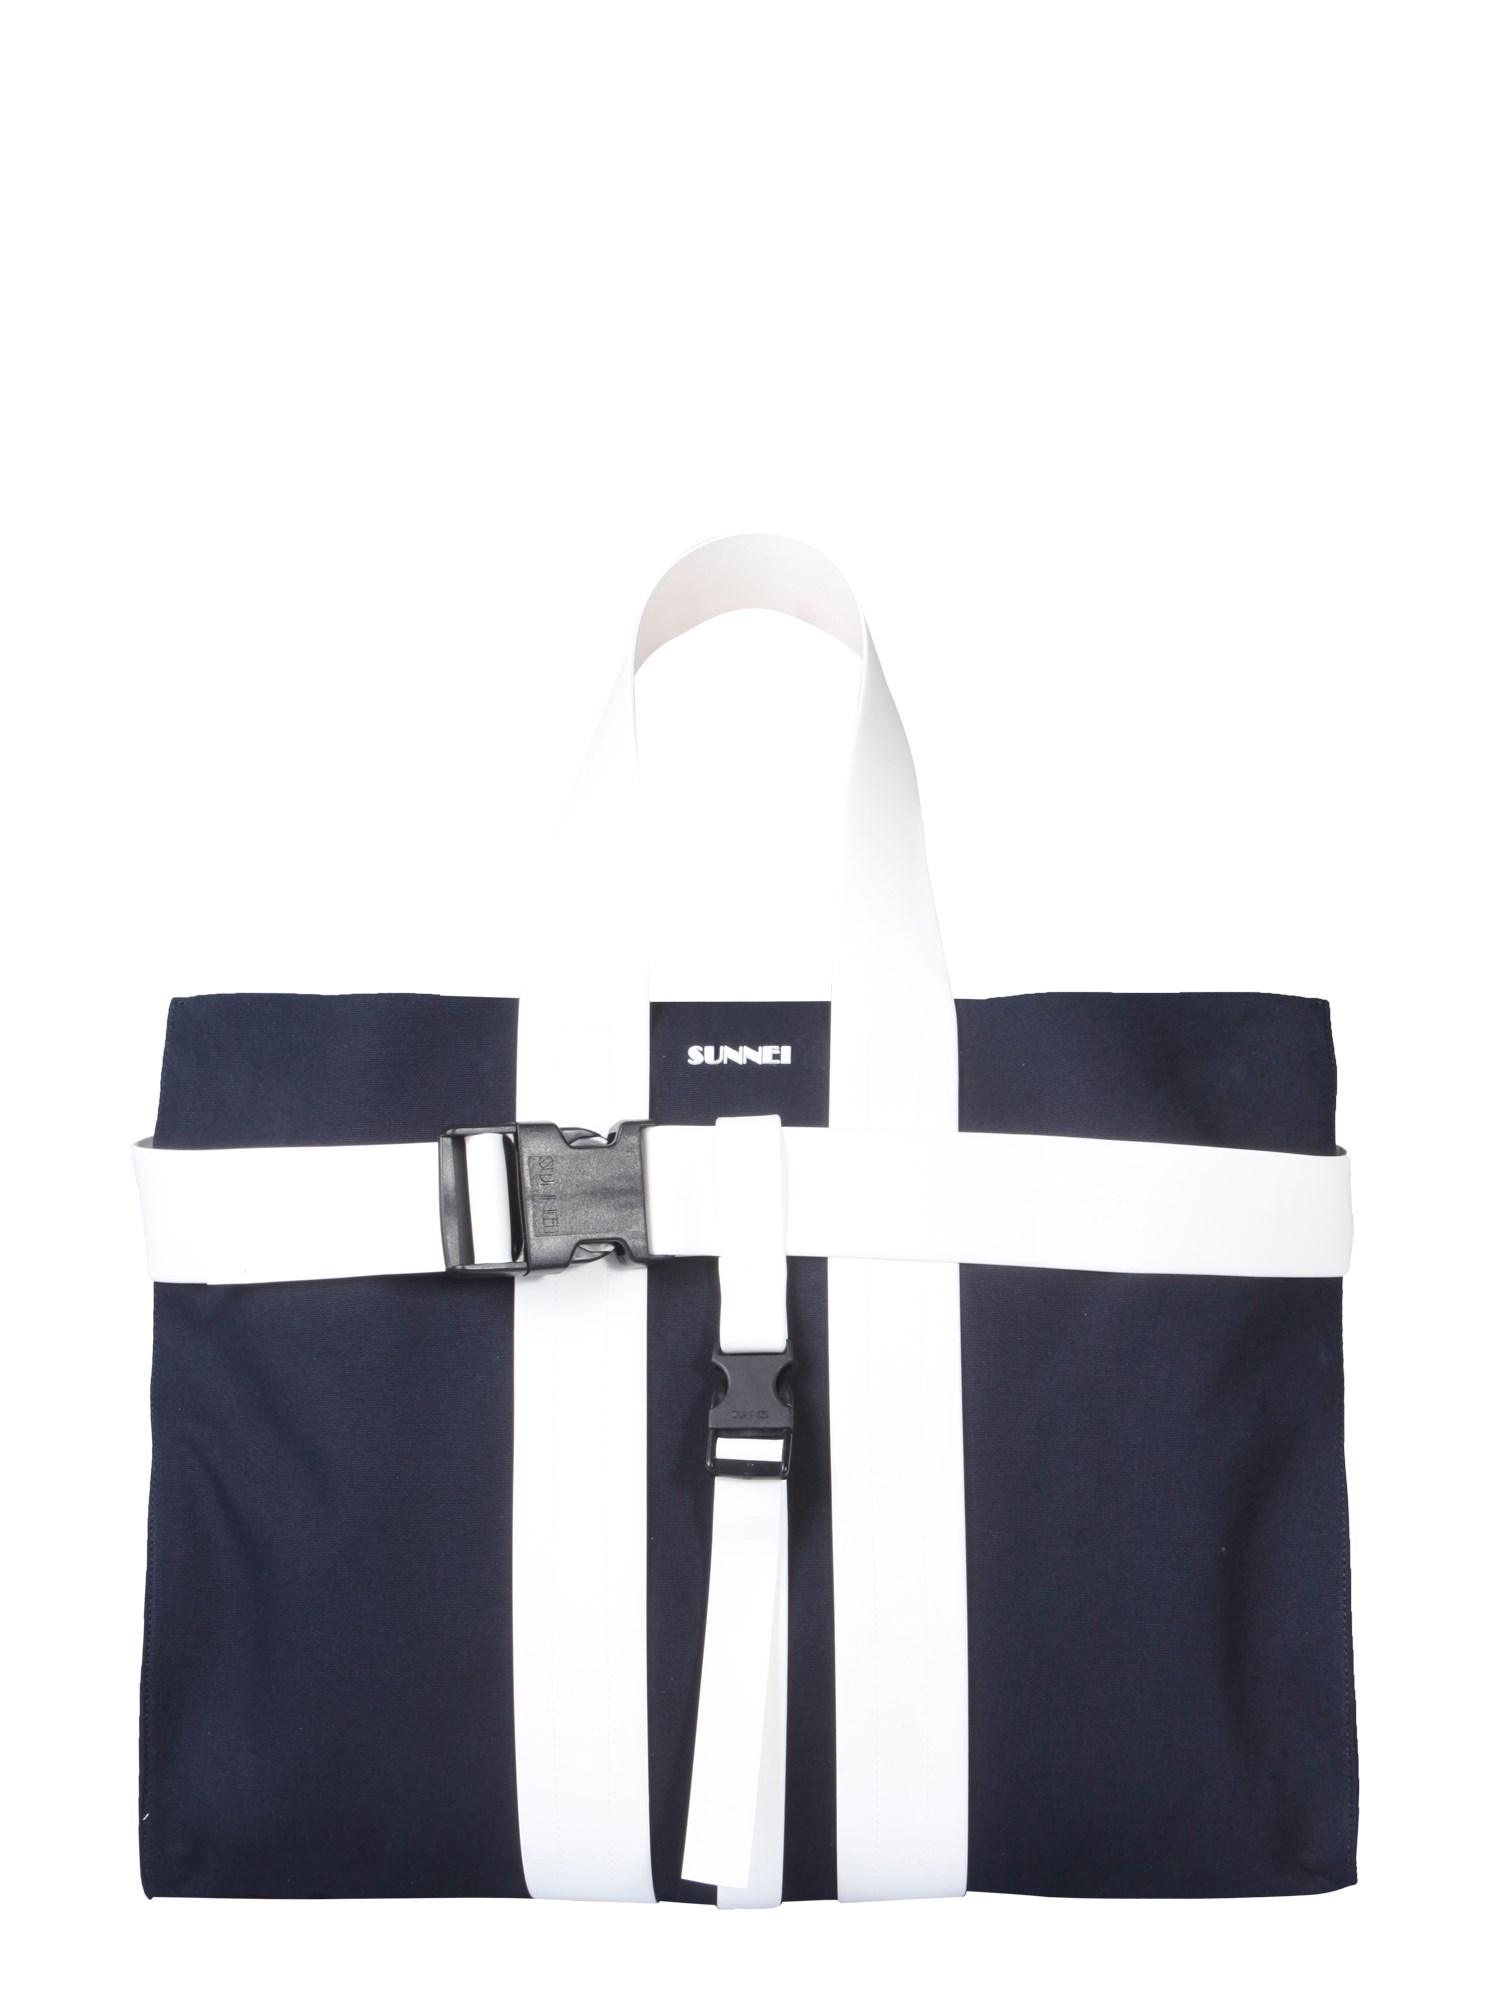 Sunnei Parallelepiped Messenger Bag In Blue